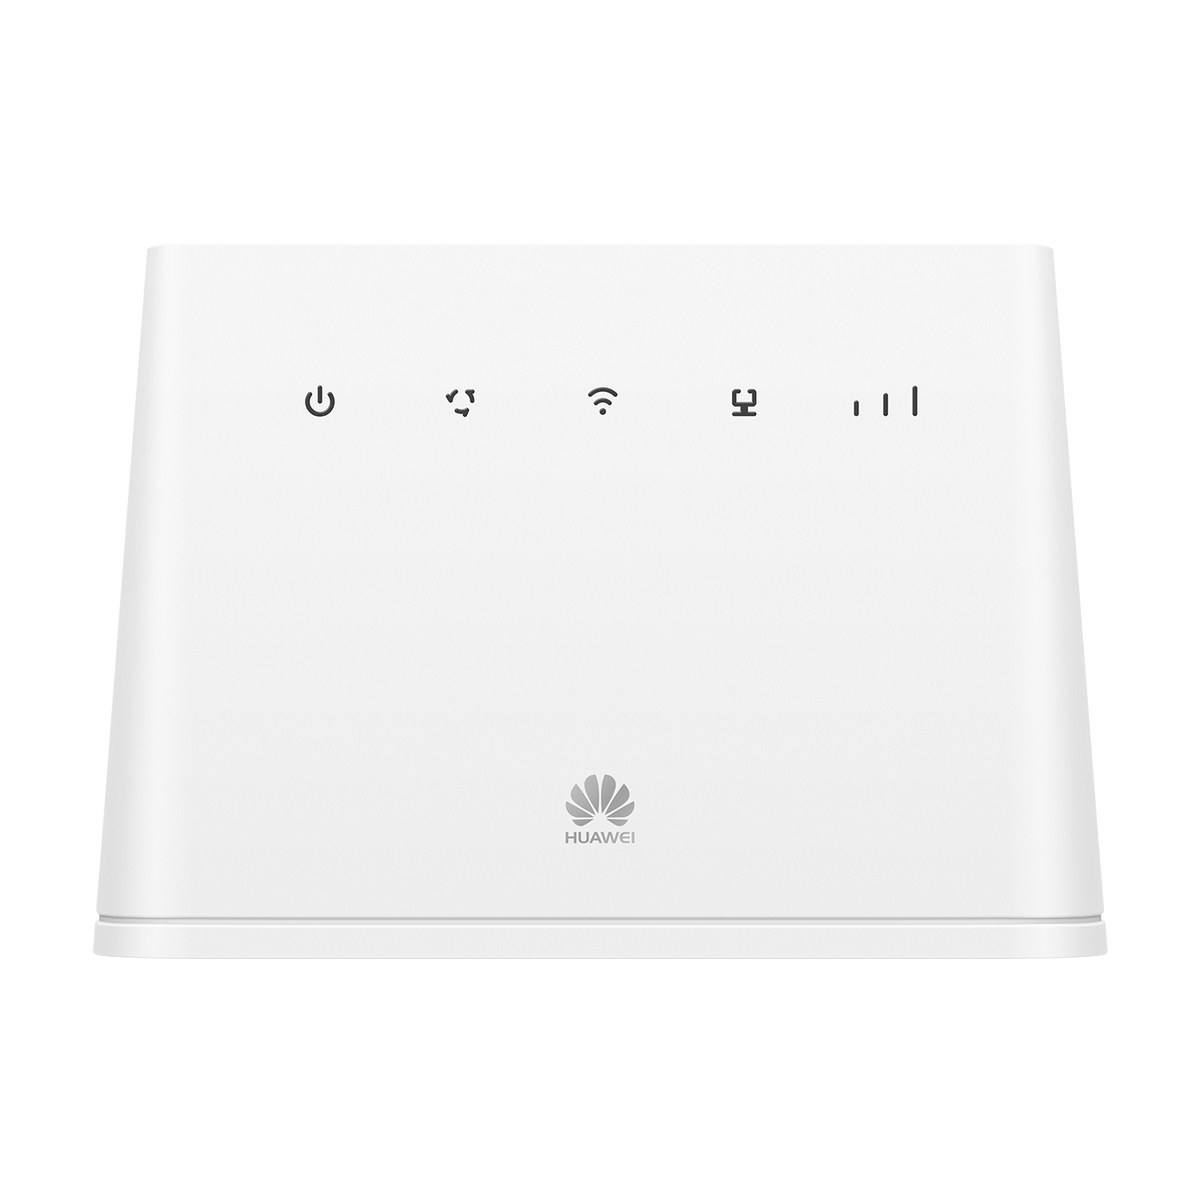 HUAWEI B311S-221 STAT LTE DL Mbit/s 150MBPS ROUTER CAT4 WHITE 4G 150 Router